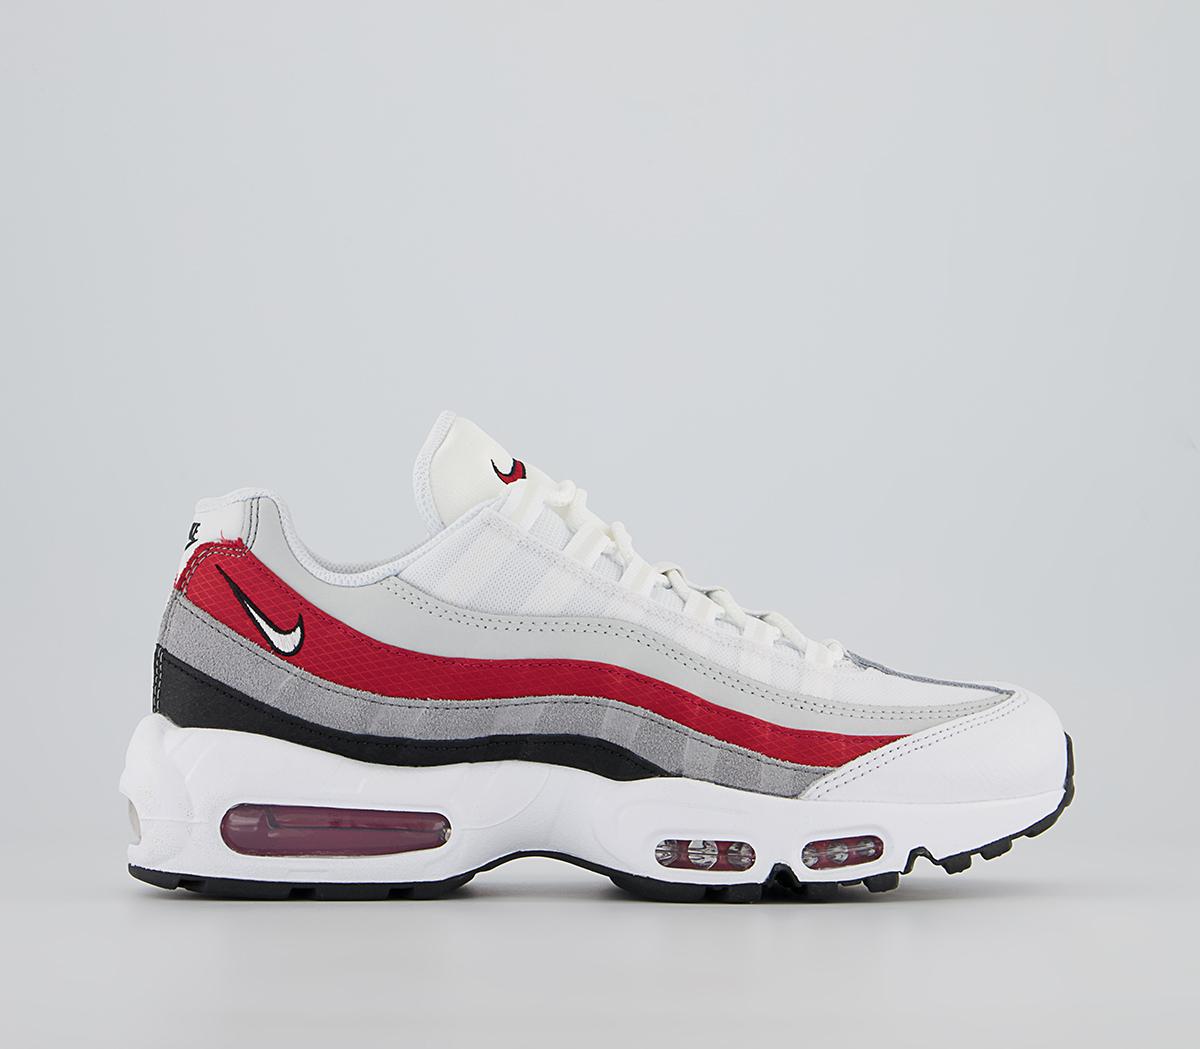 NikeAir Max 95 TrainersBlack White Varsity Red Particle Grey